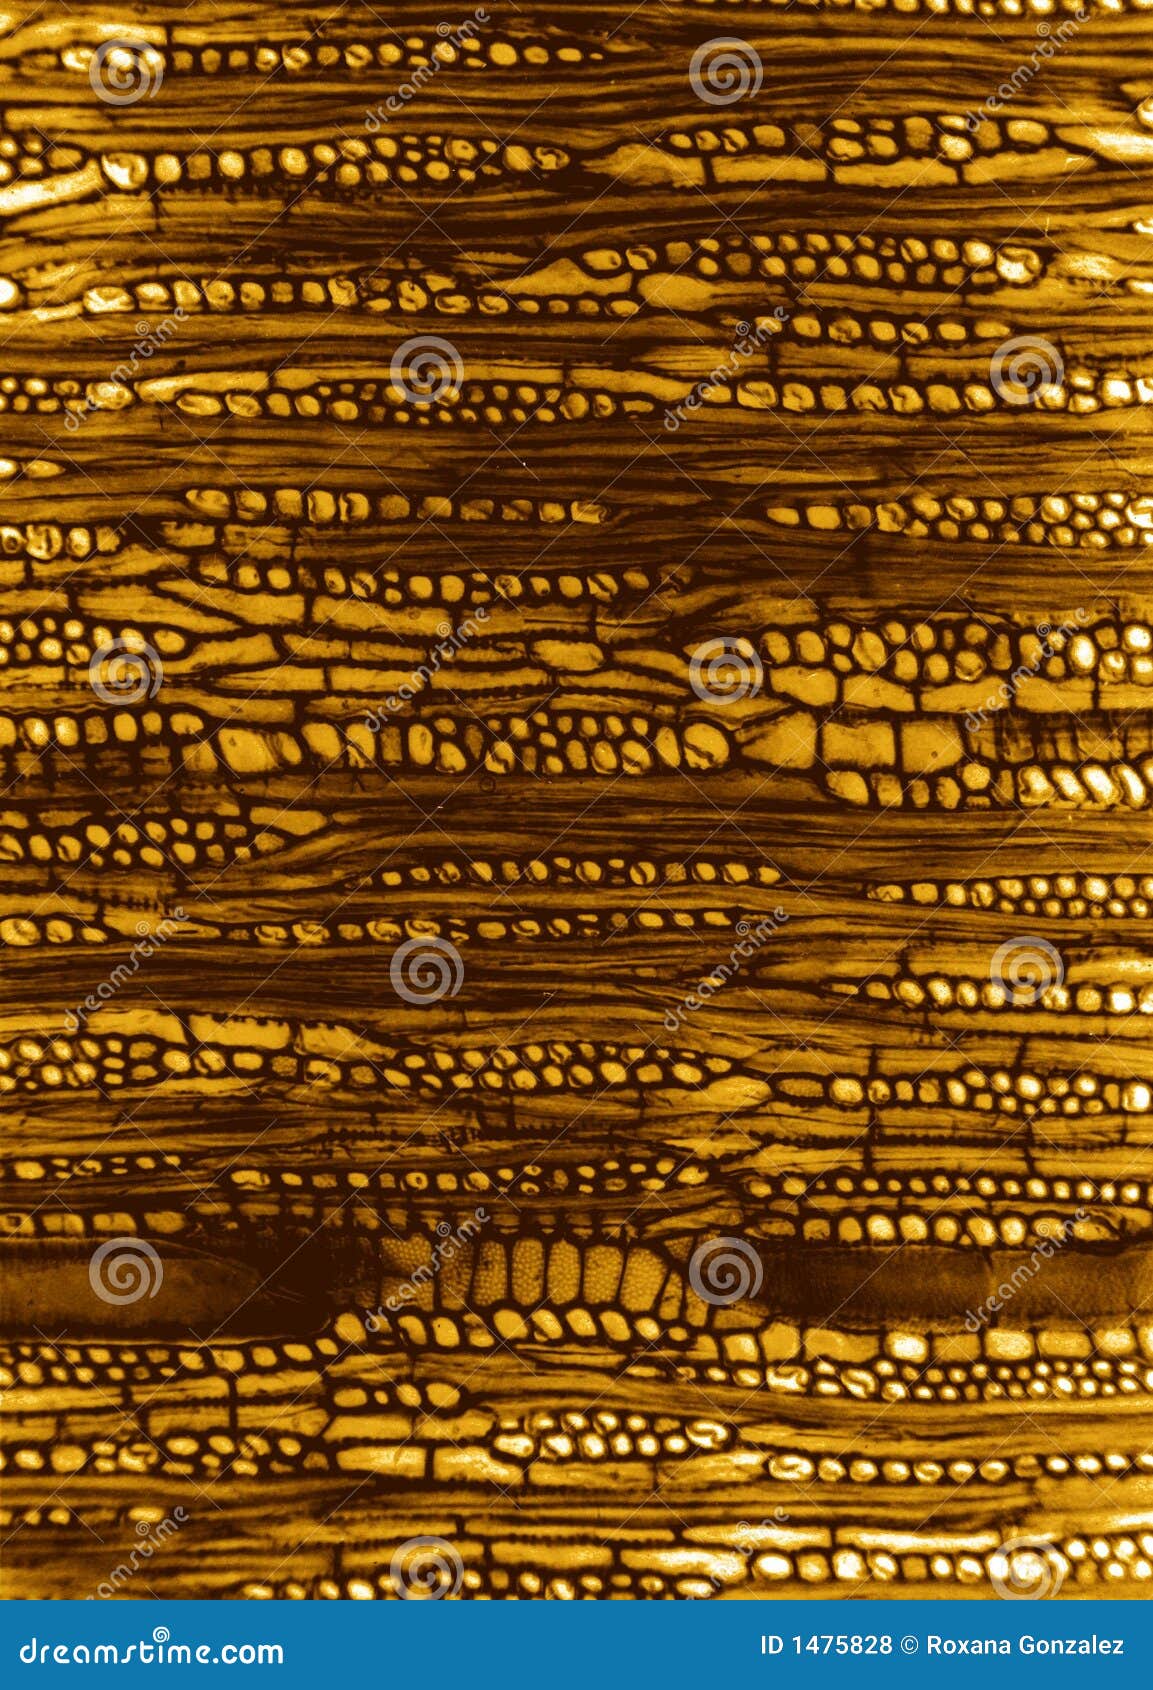 microscopic wood section